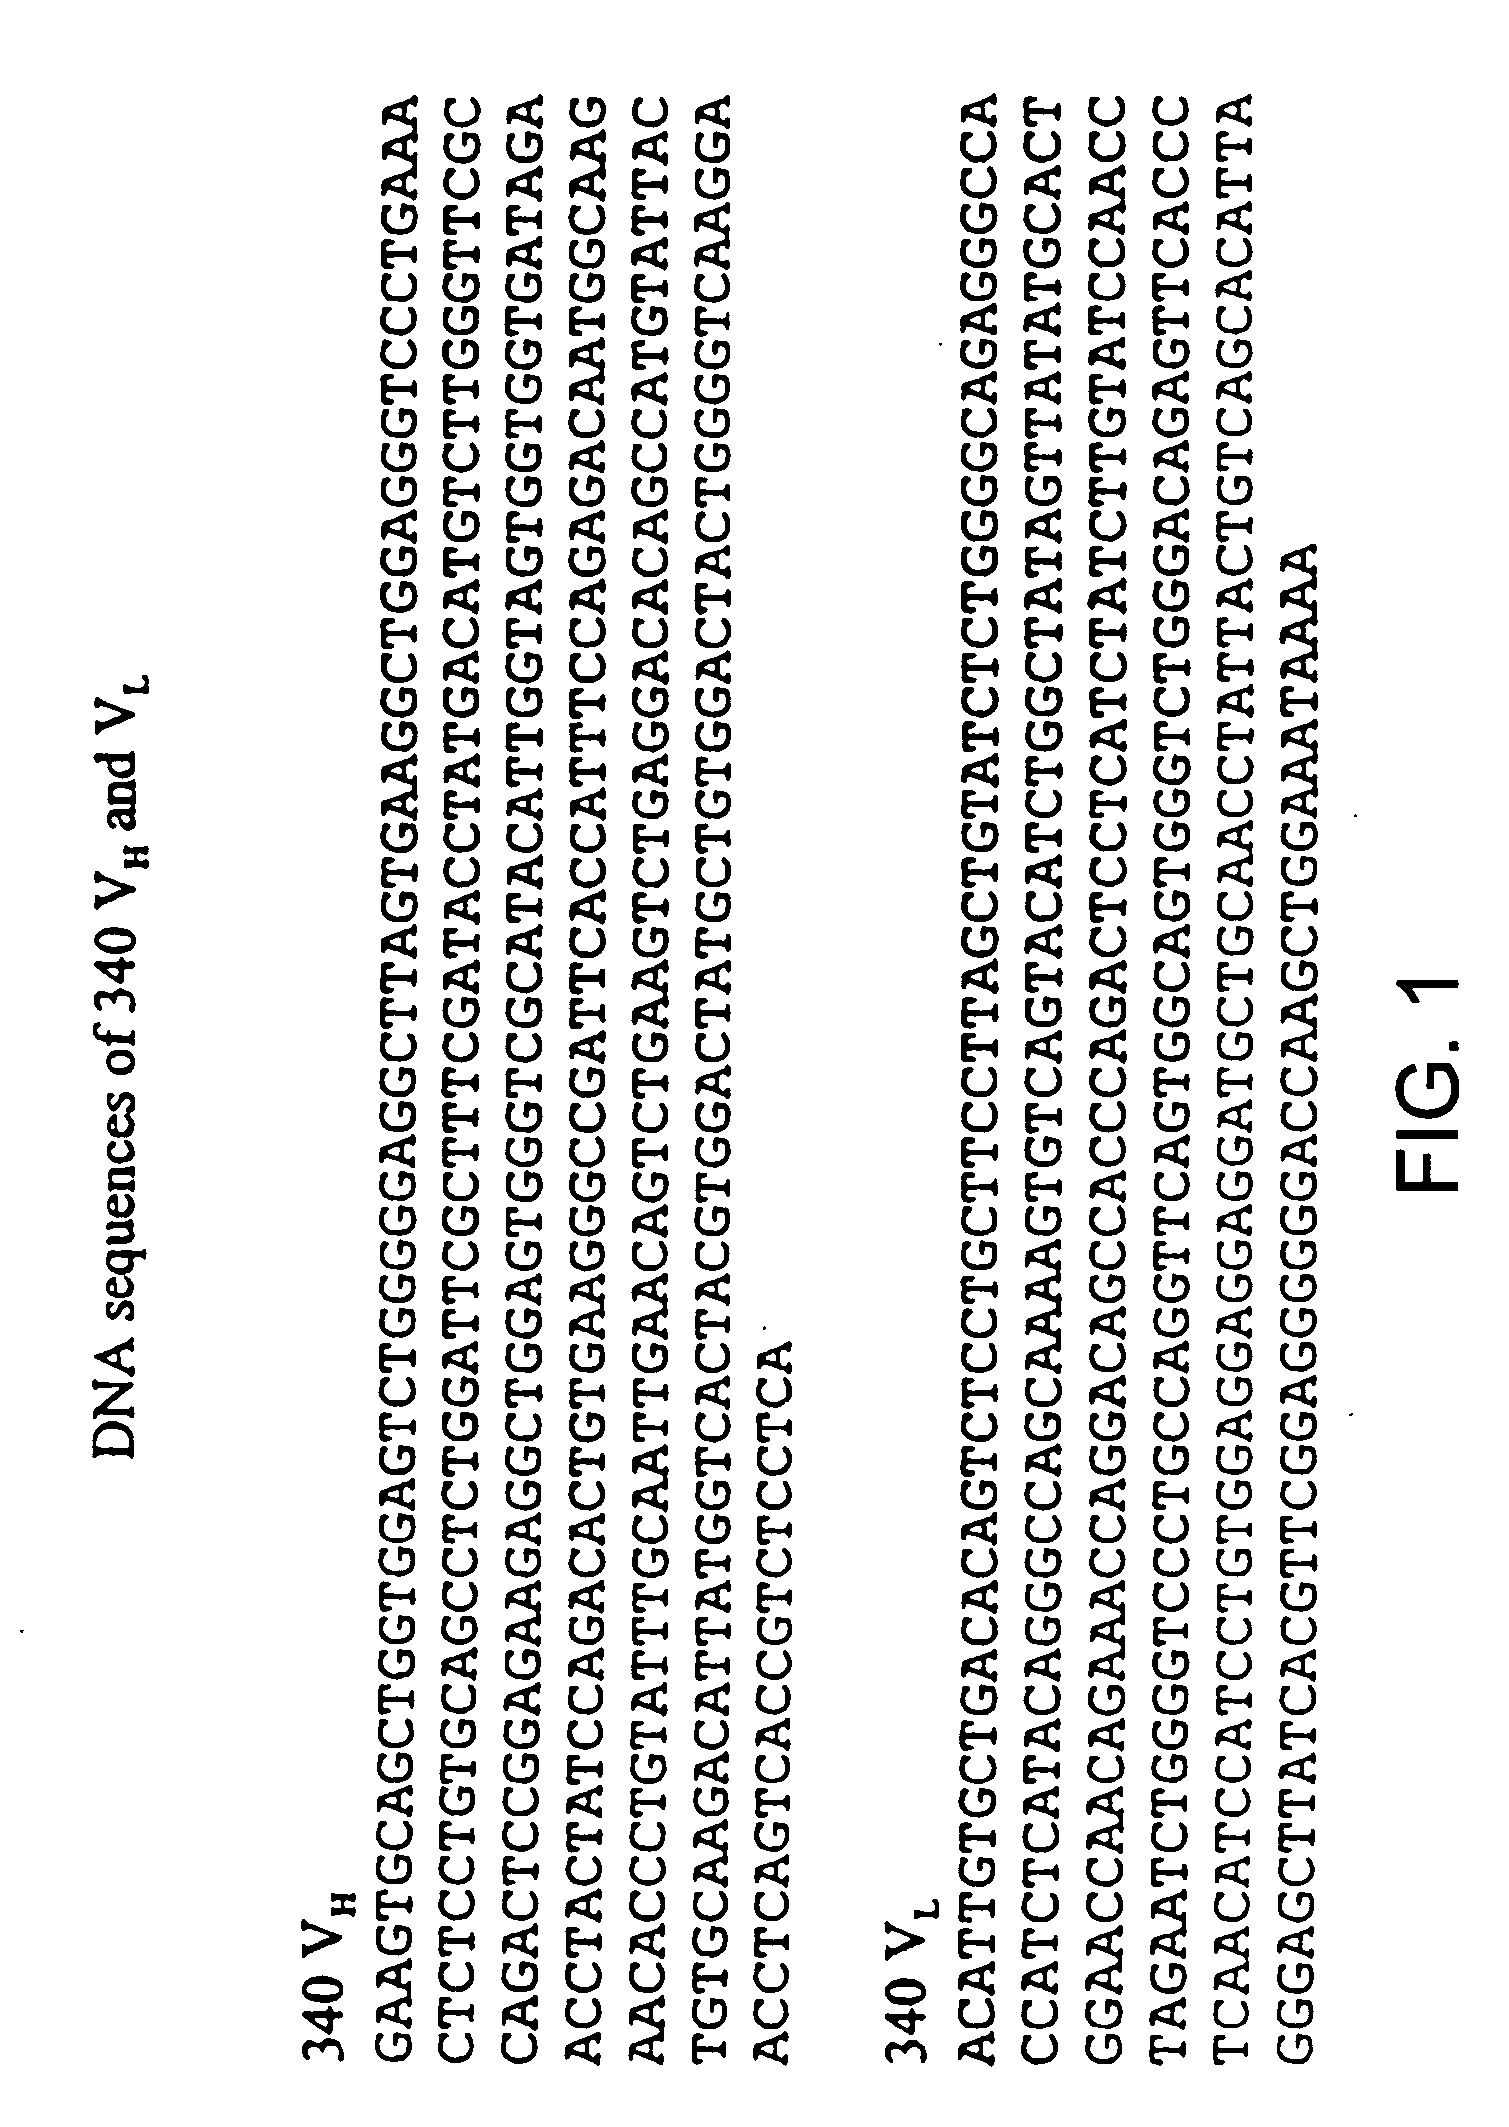 Method for the production of non-immunogenic proteins